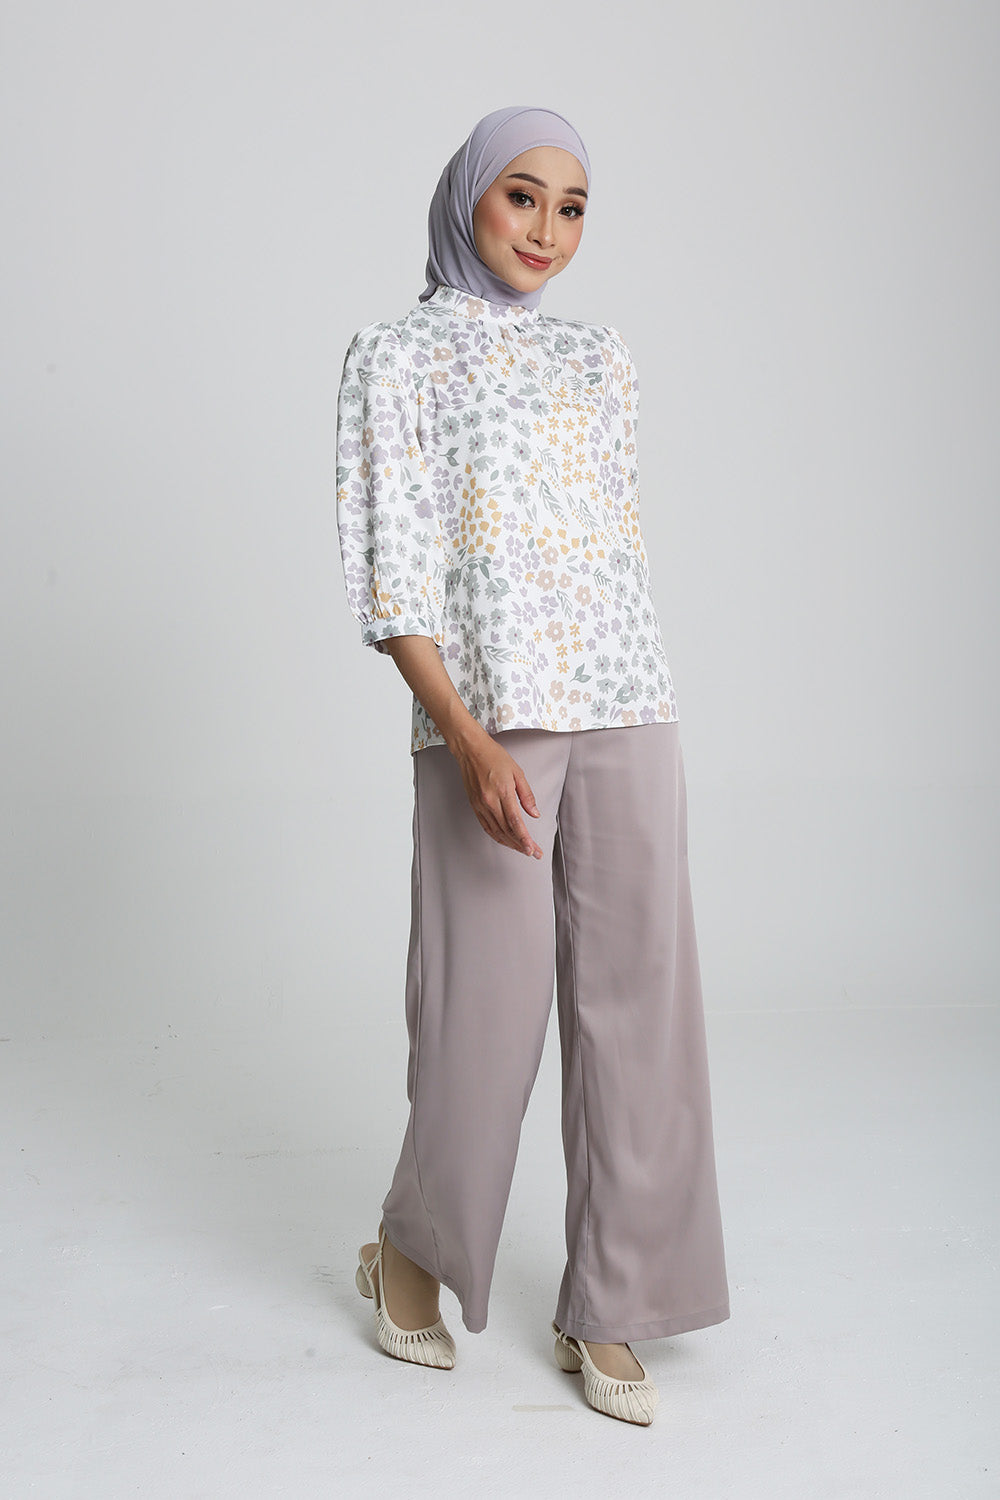 The Botani Floral Blouse in Nude